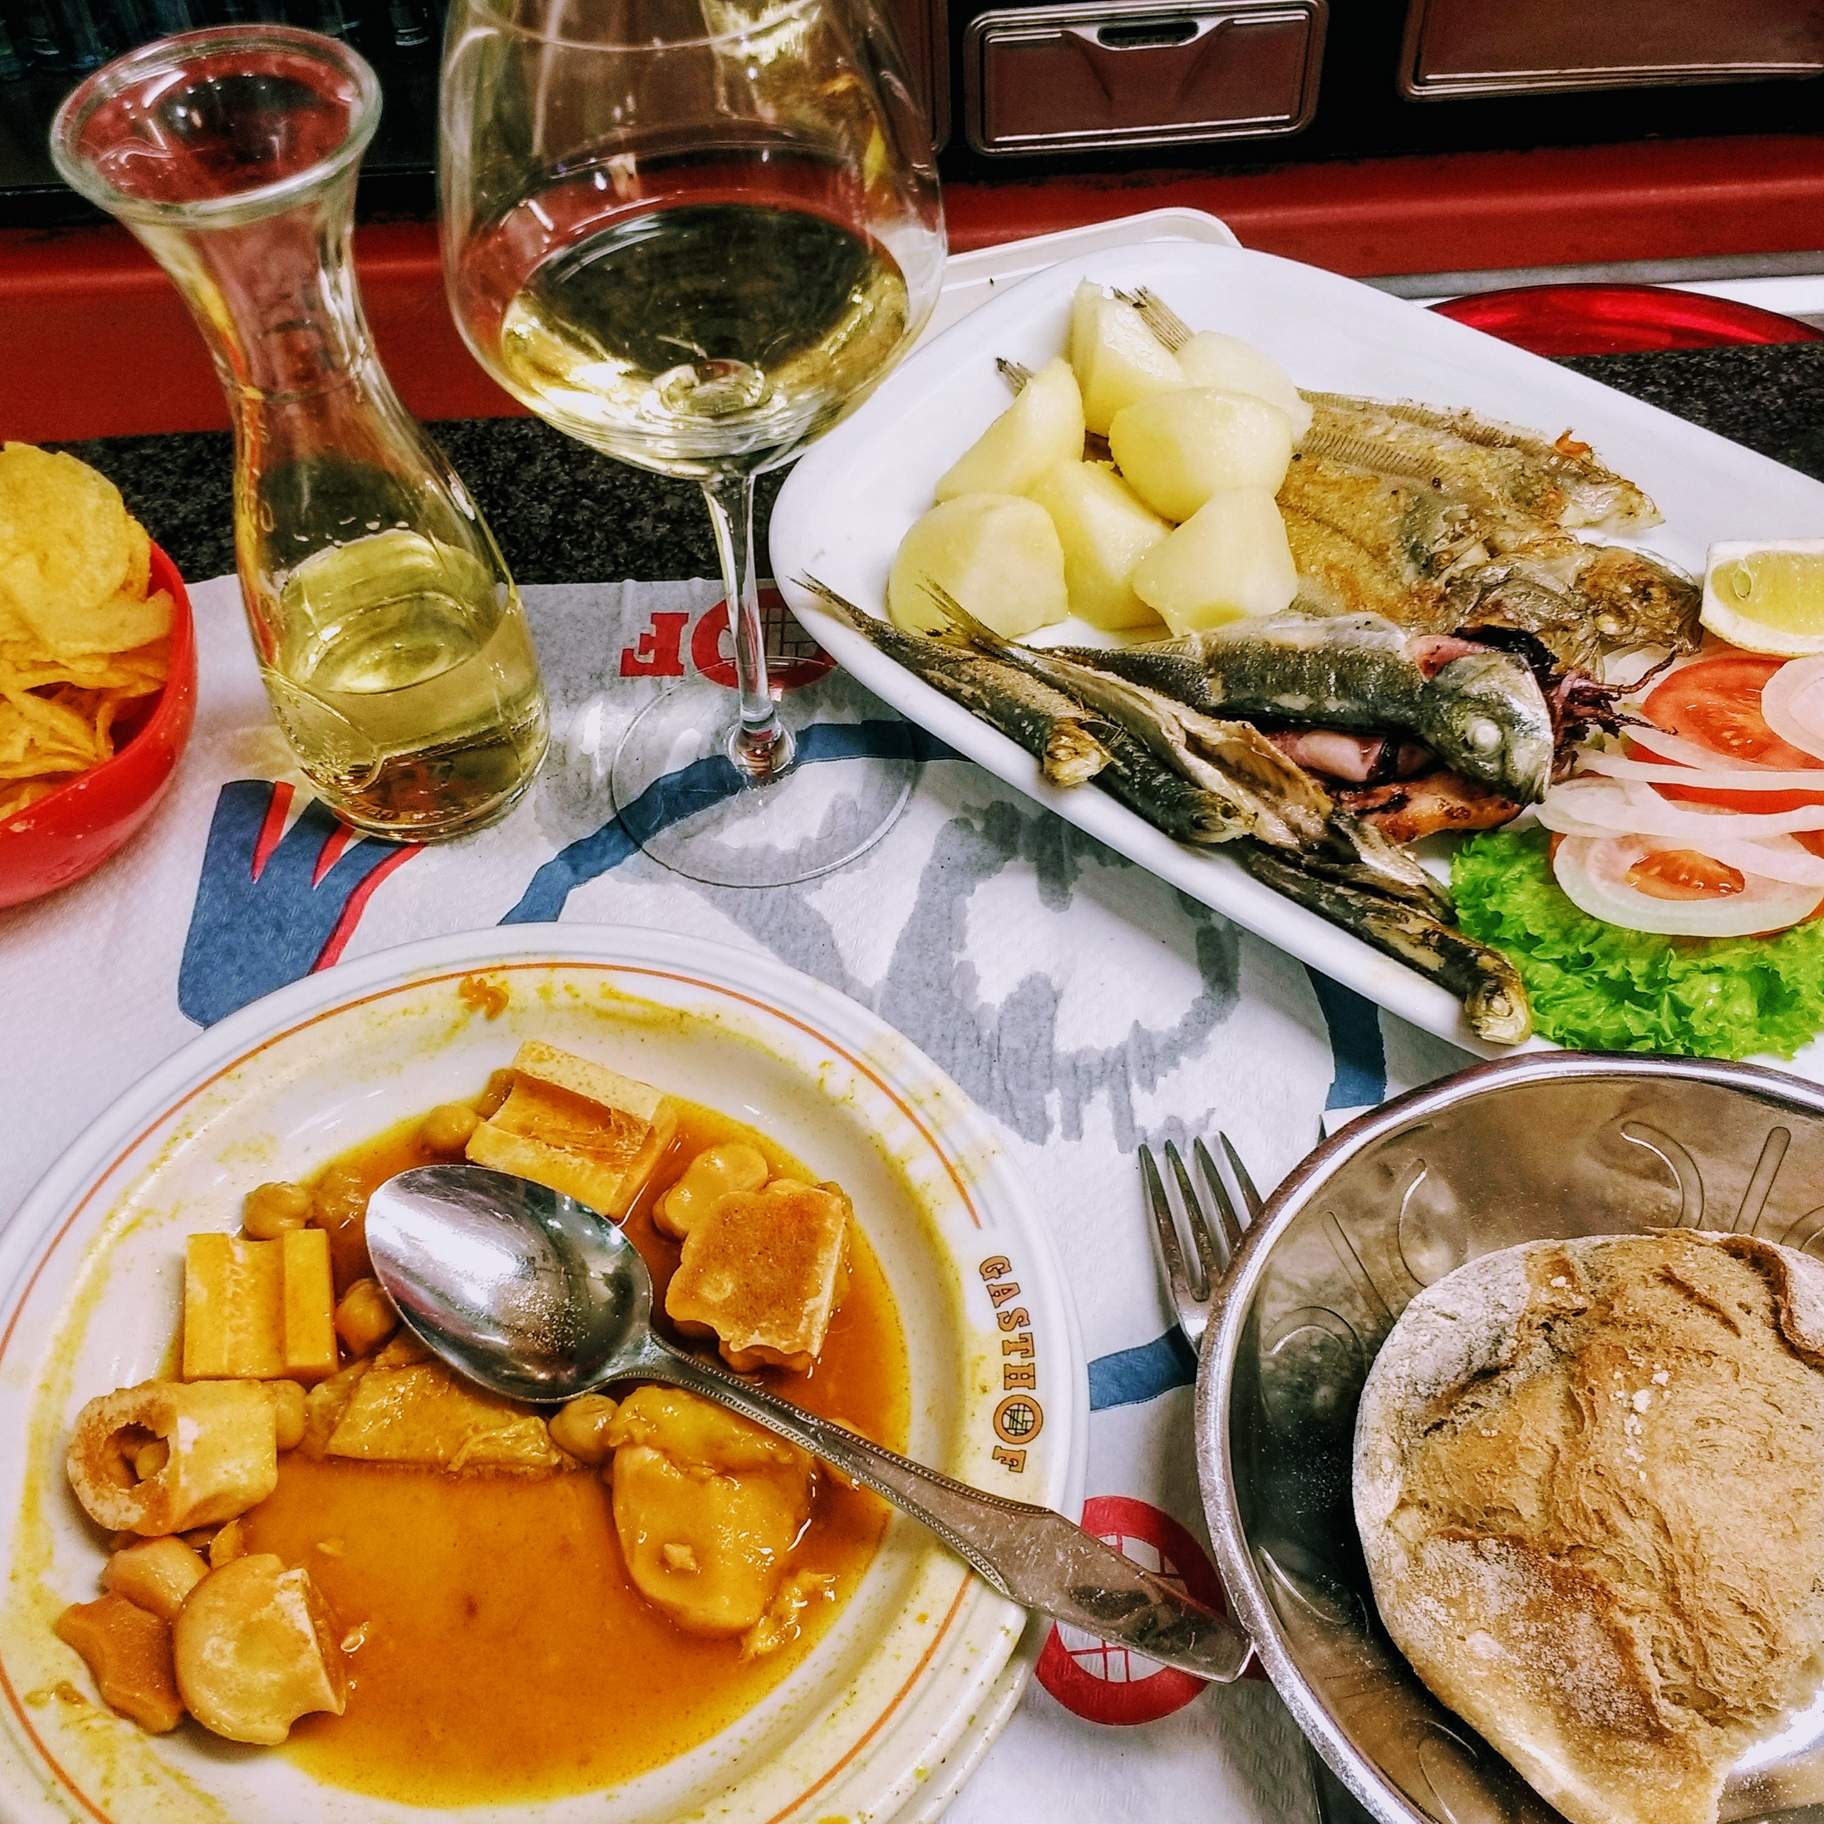 The menú del día with chips, a beef and potato stew, bread, white wine, mixed fish, potatoes, and some vegetables. It also came with dessert (not shown), for which I selected Tarta de Santiago (kind of a yellow cake).  All this cost less than 10 euros.